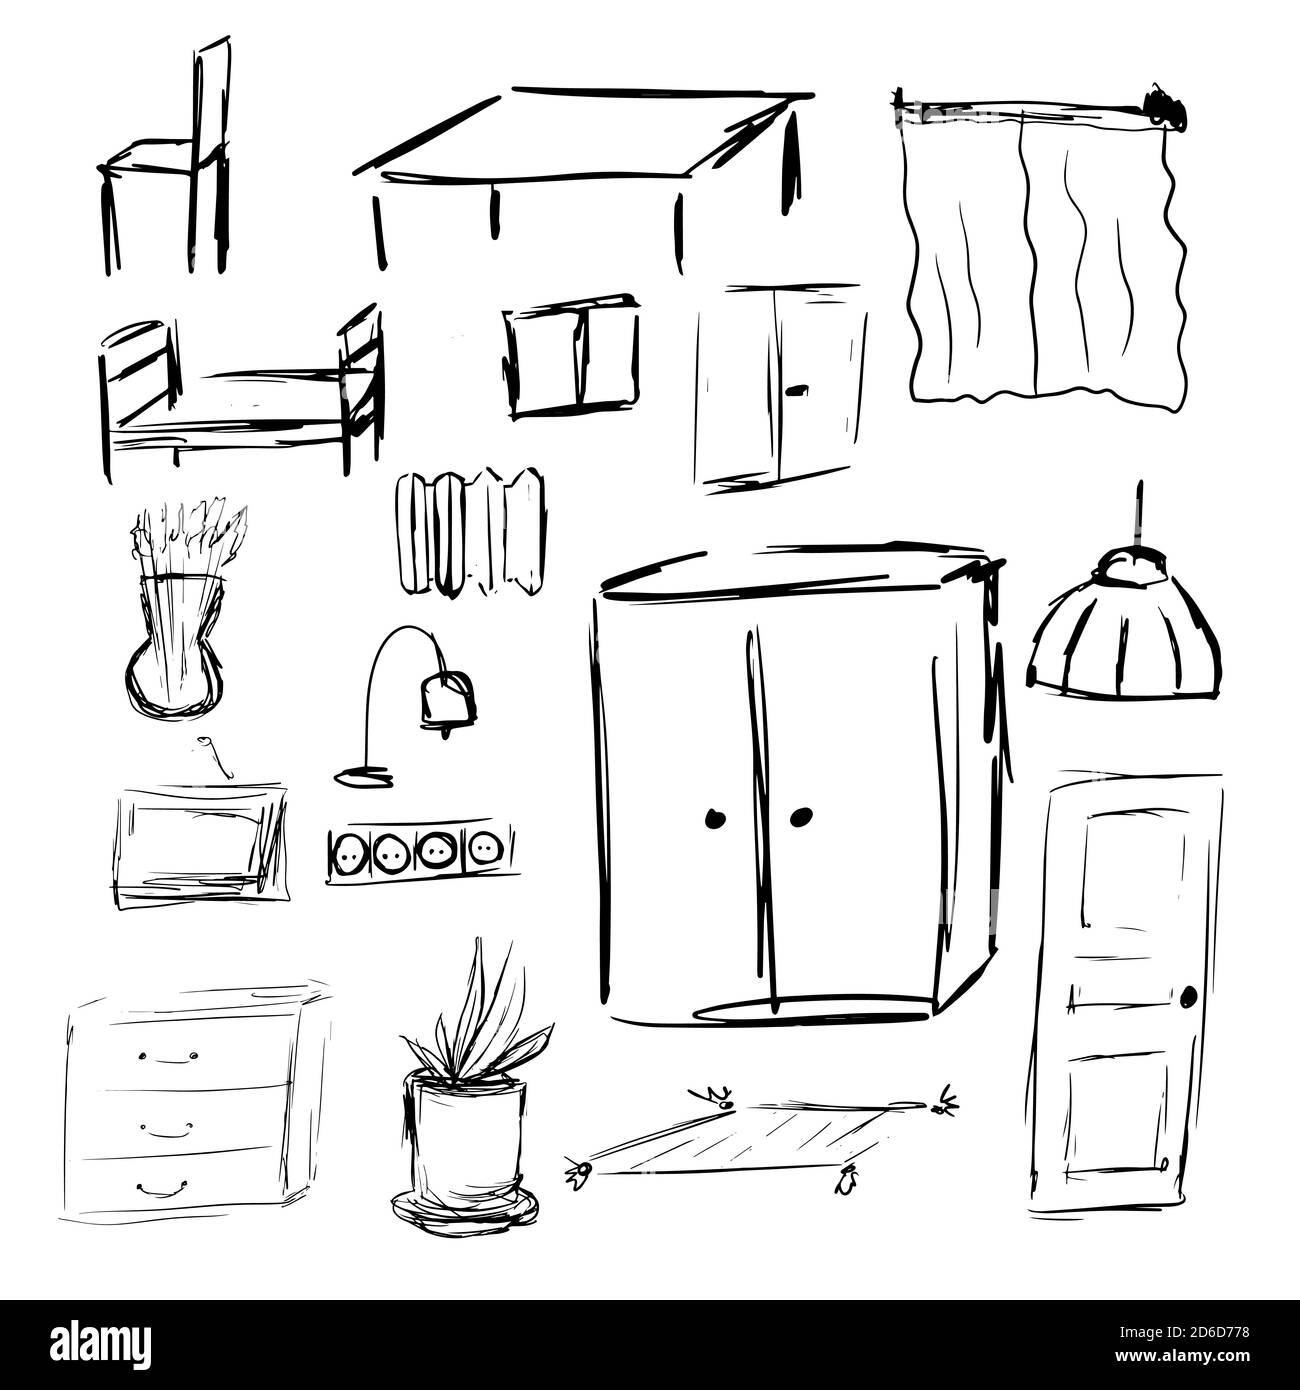 Furniture Sketches Vector Images (over 15,000)